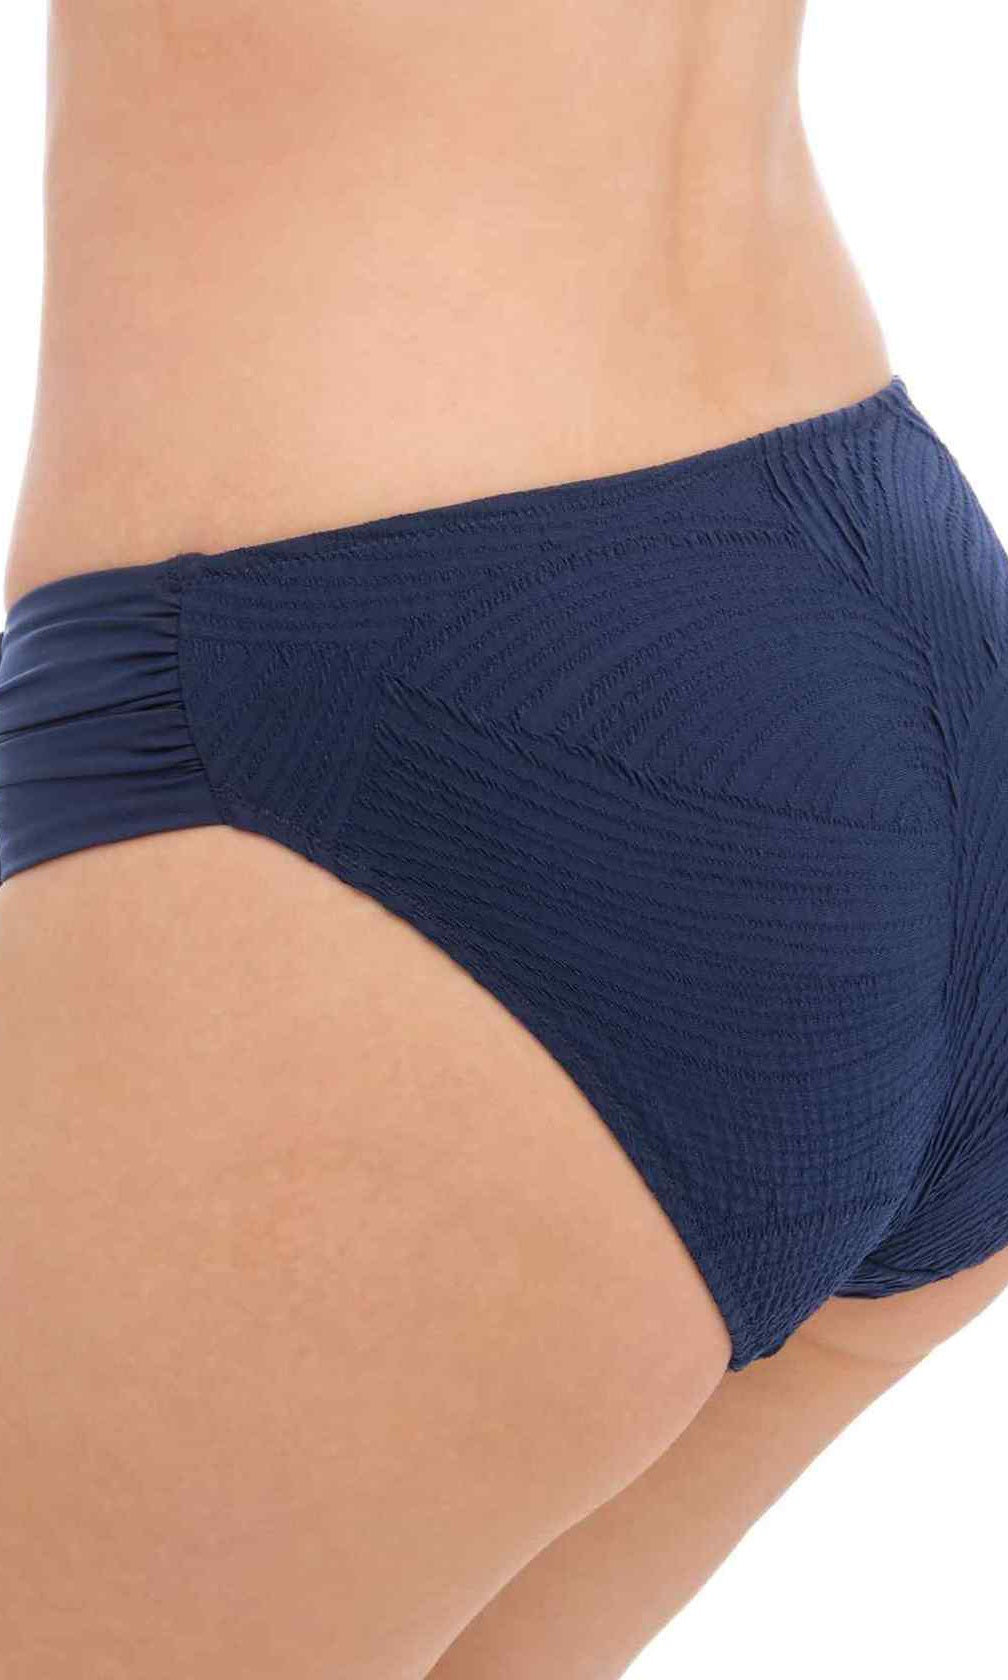 Ottawa Ink Mid Rise Brief, Special Order Size XS - 2XL